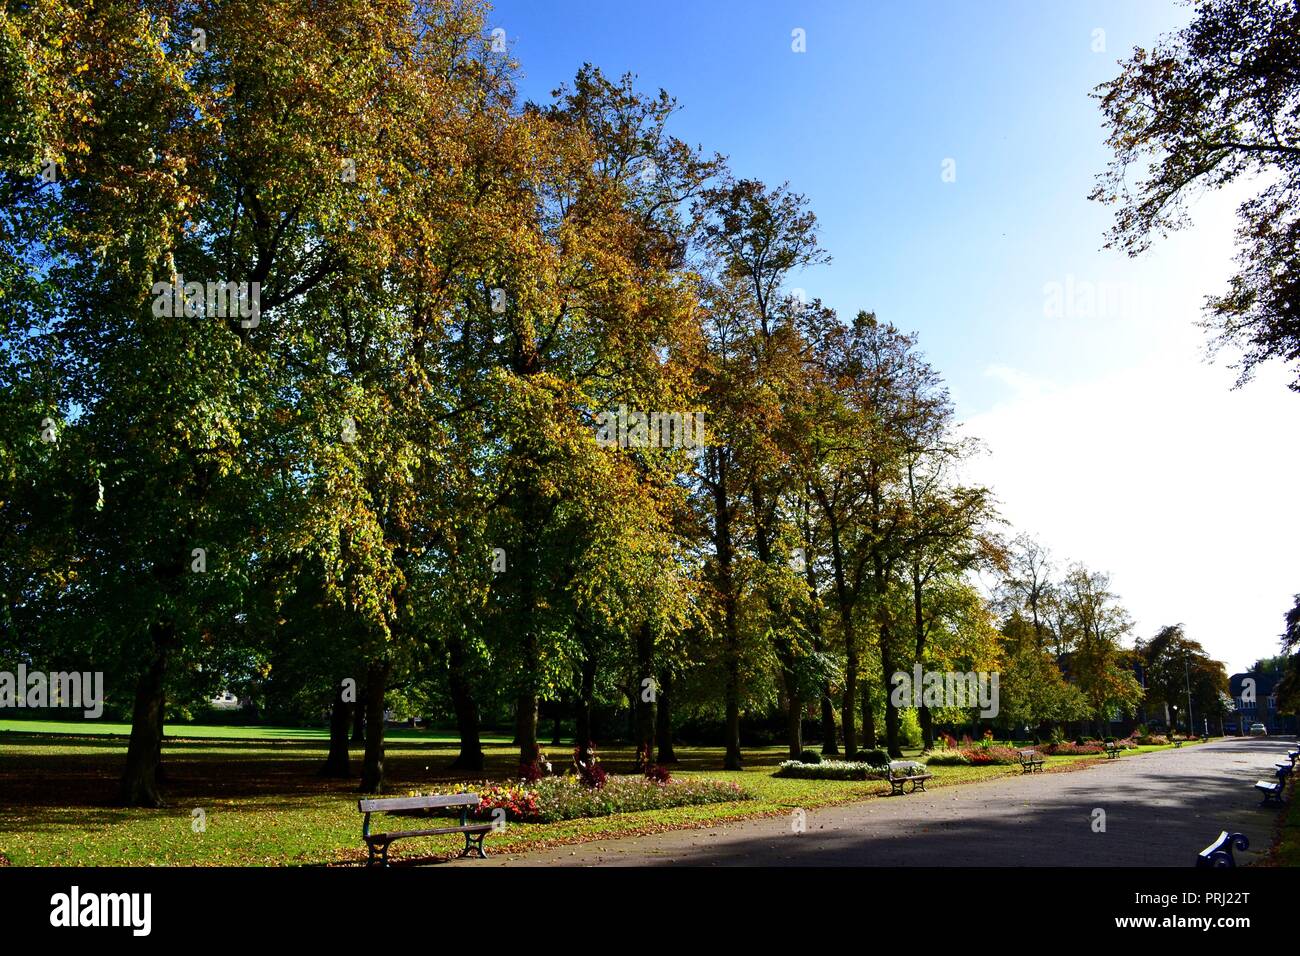 Bright, colourful, naturally lit images showing Ropner Park, a traditional British Victorian public park in Stockton-on-Tees, at the start of Autumn. Stock Photo